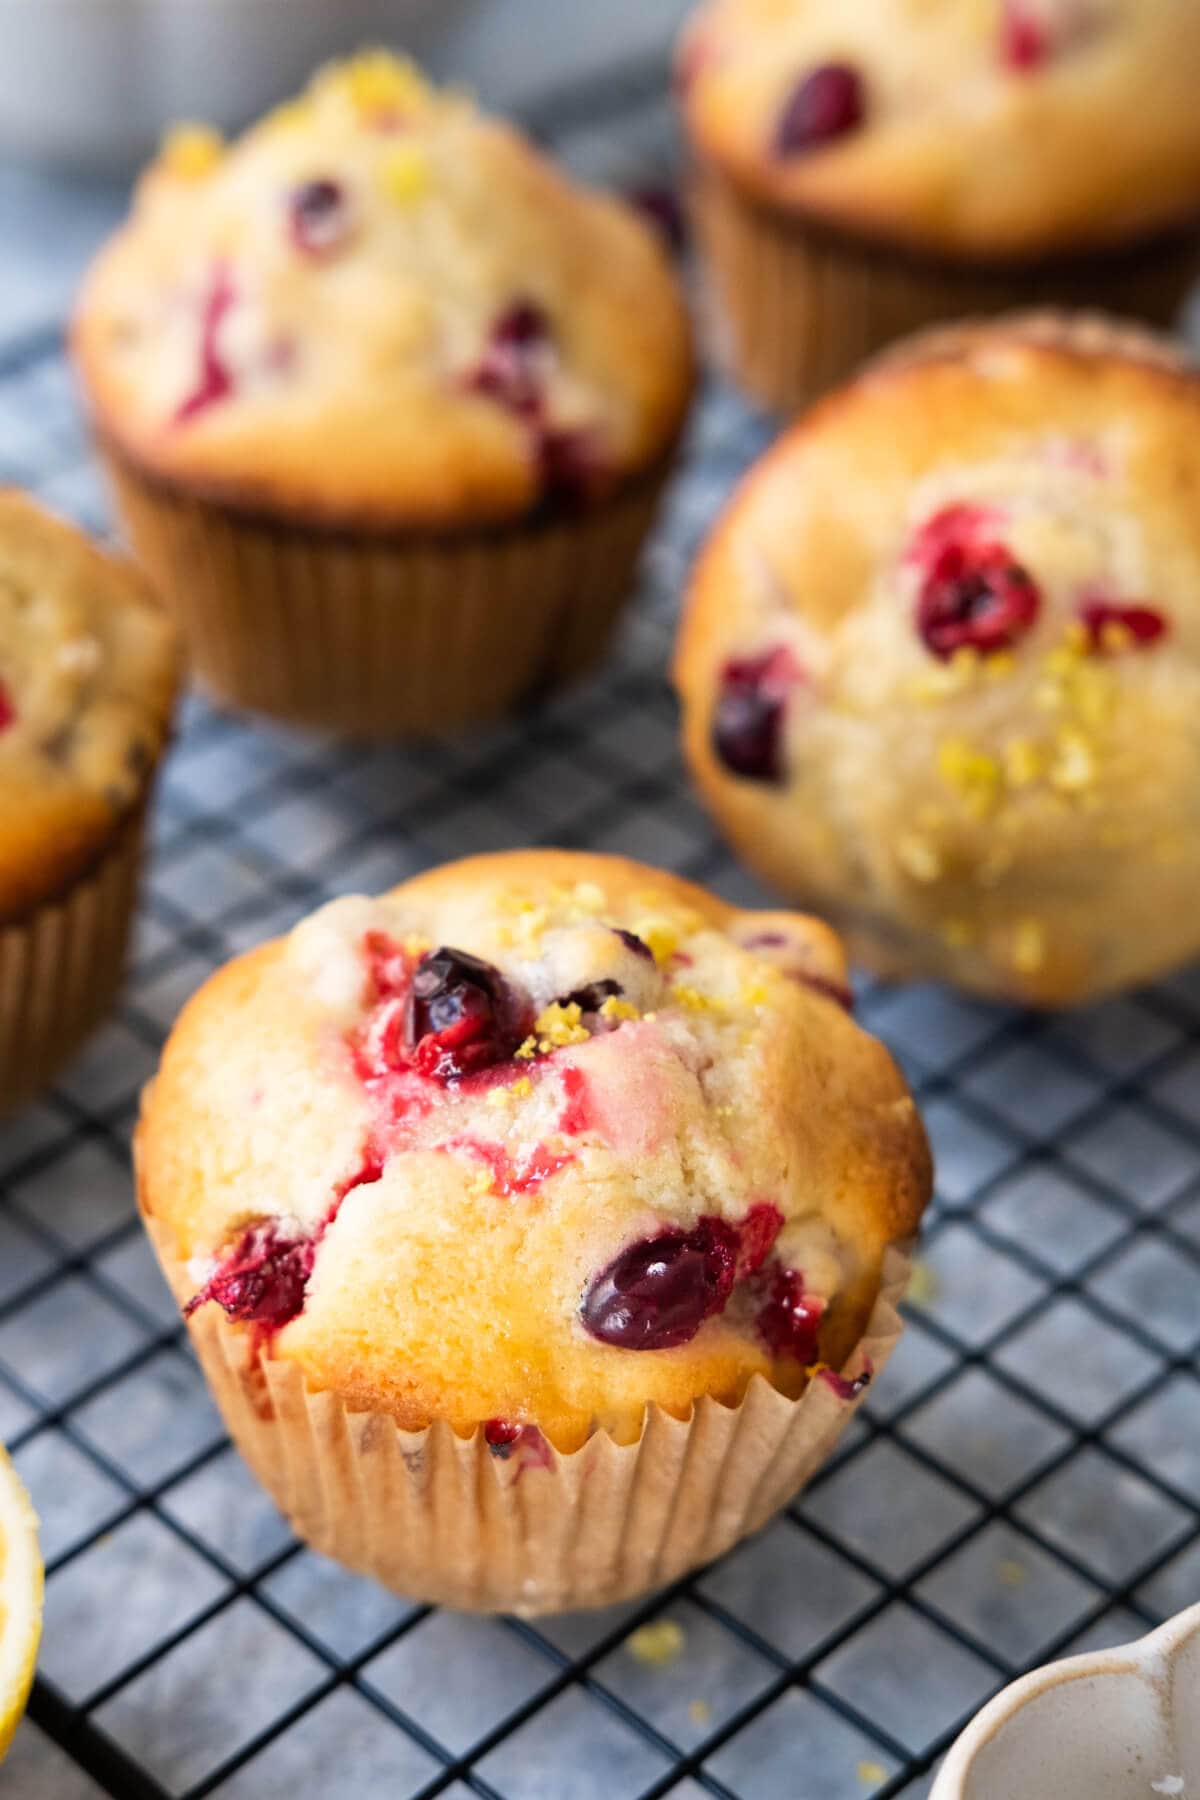 A muffin filled with juicy round cranberries and lemon zest placed on a tray. 